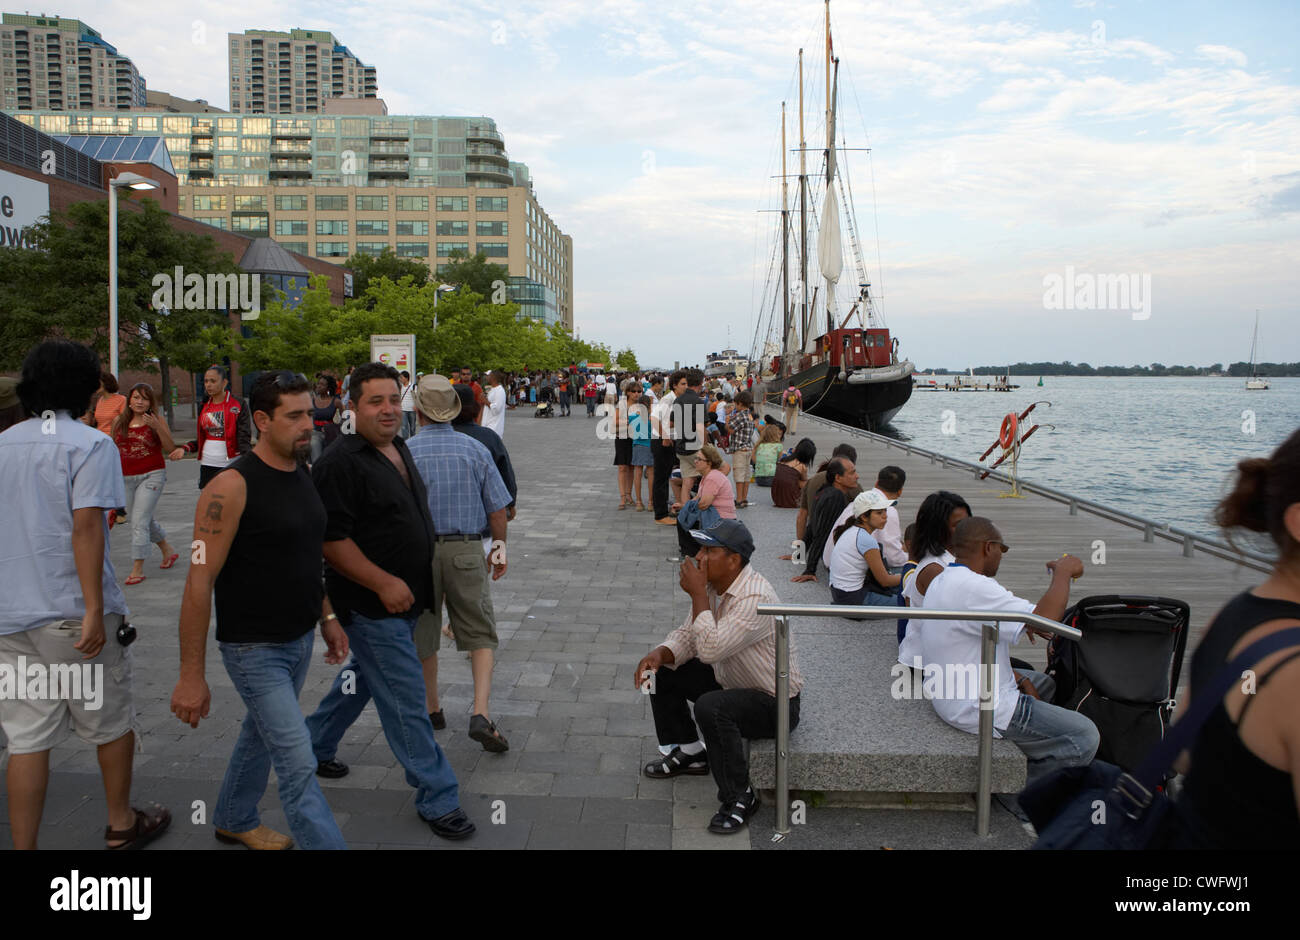 Toronto - Harbourfront Centre people enjoy on a summer evening Stock Photo